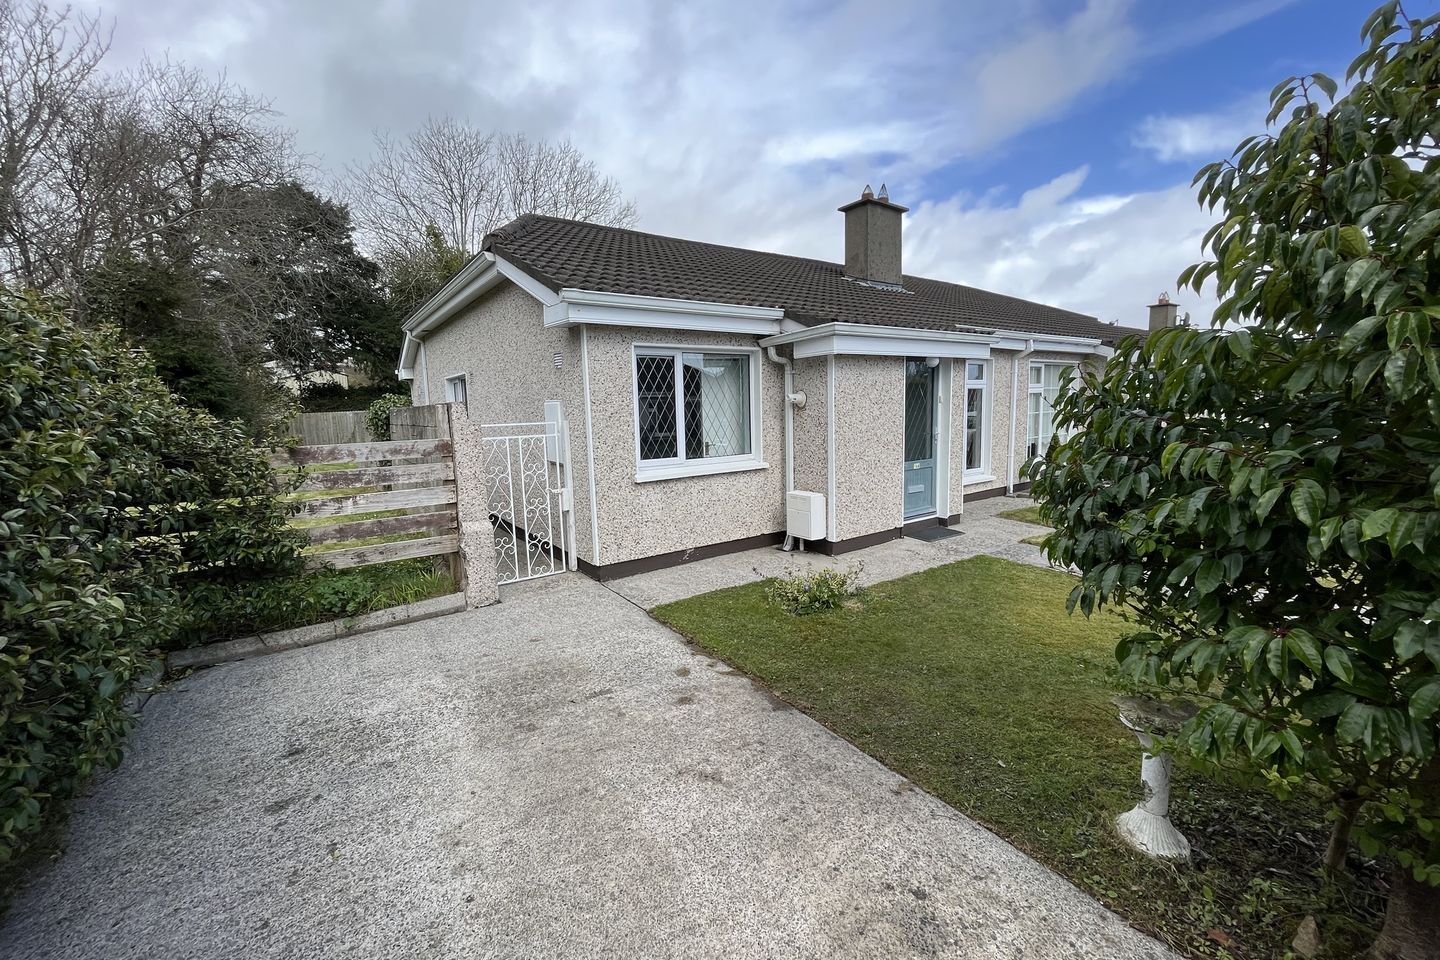 14A Kenure Court, Powerscourt, Waterford City, Co. Waterford